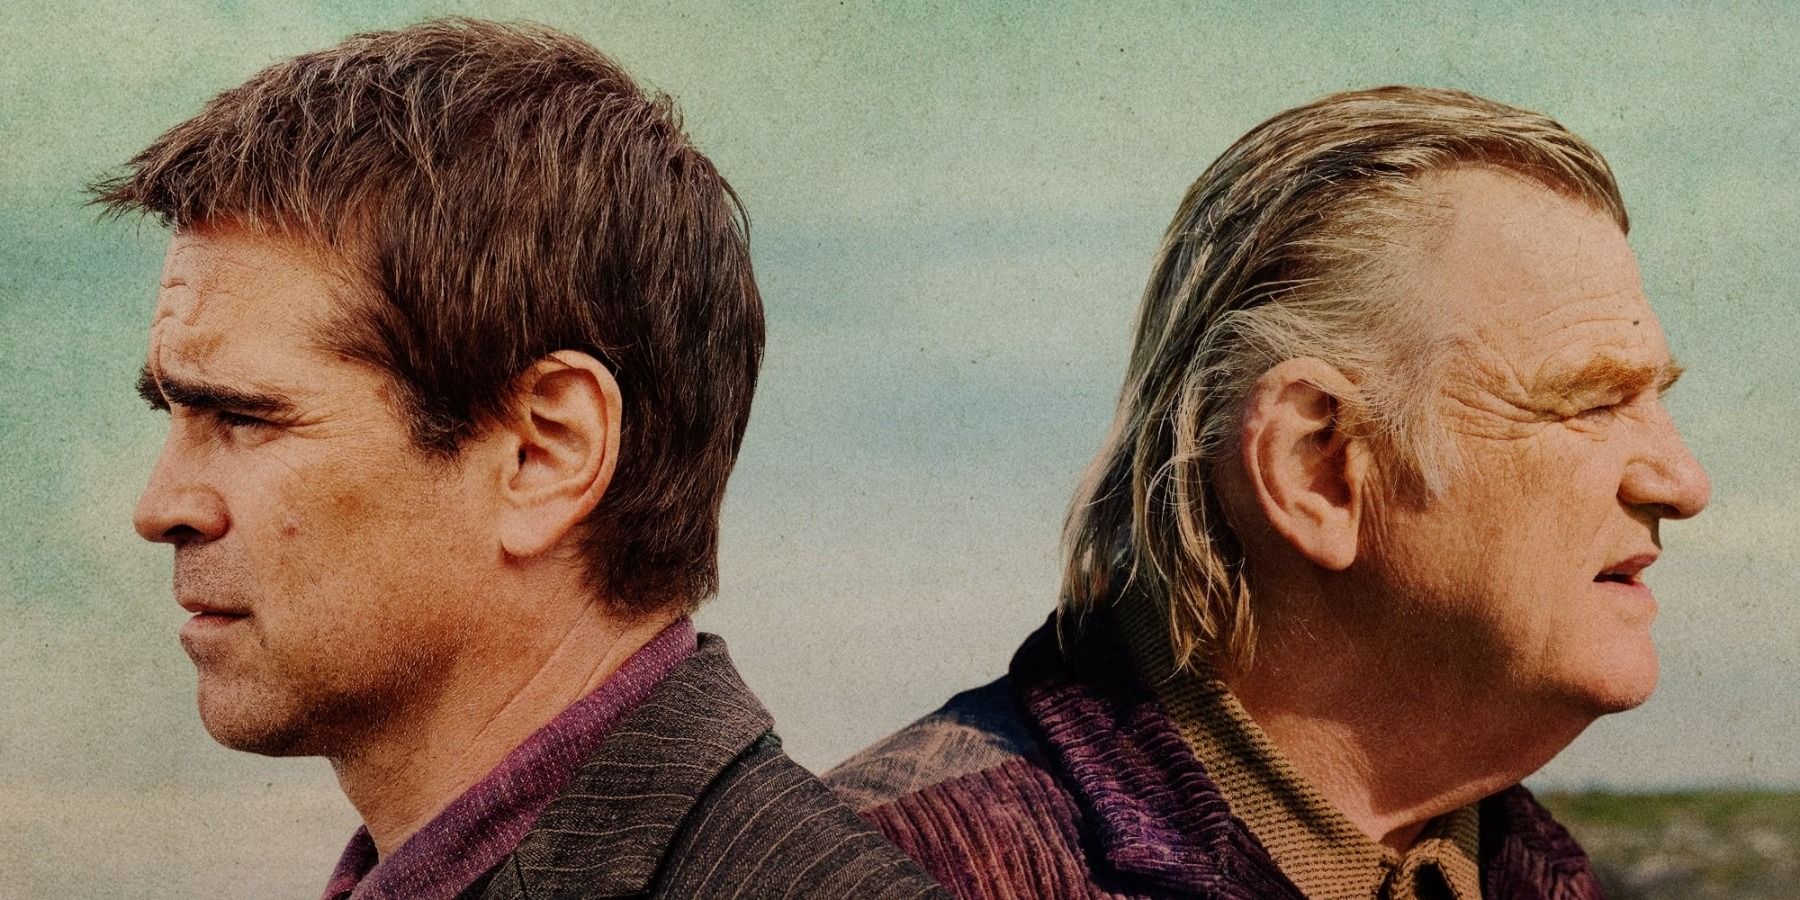 Colin Farrell and Brendan Gleeson in The Banshees of Inisherin poster